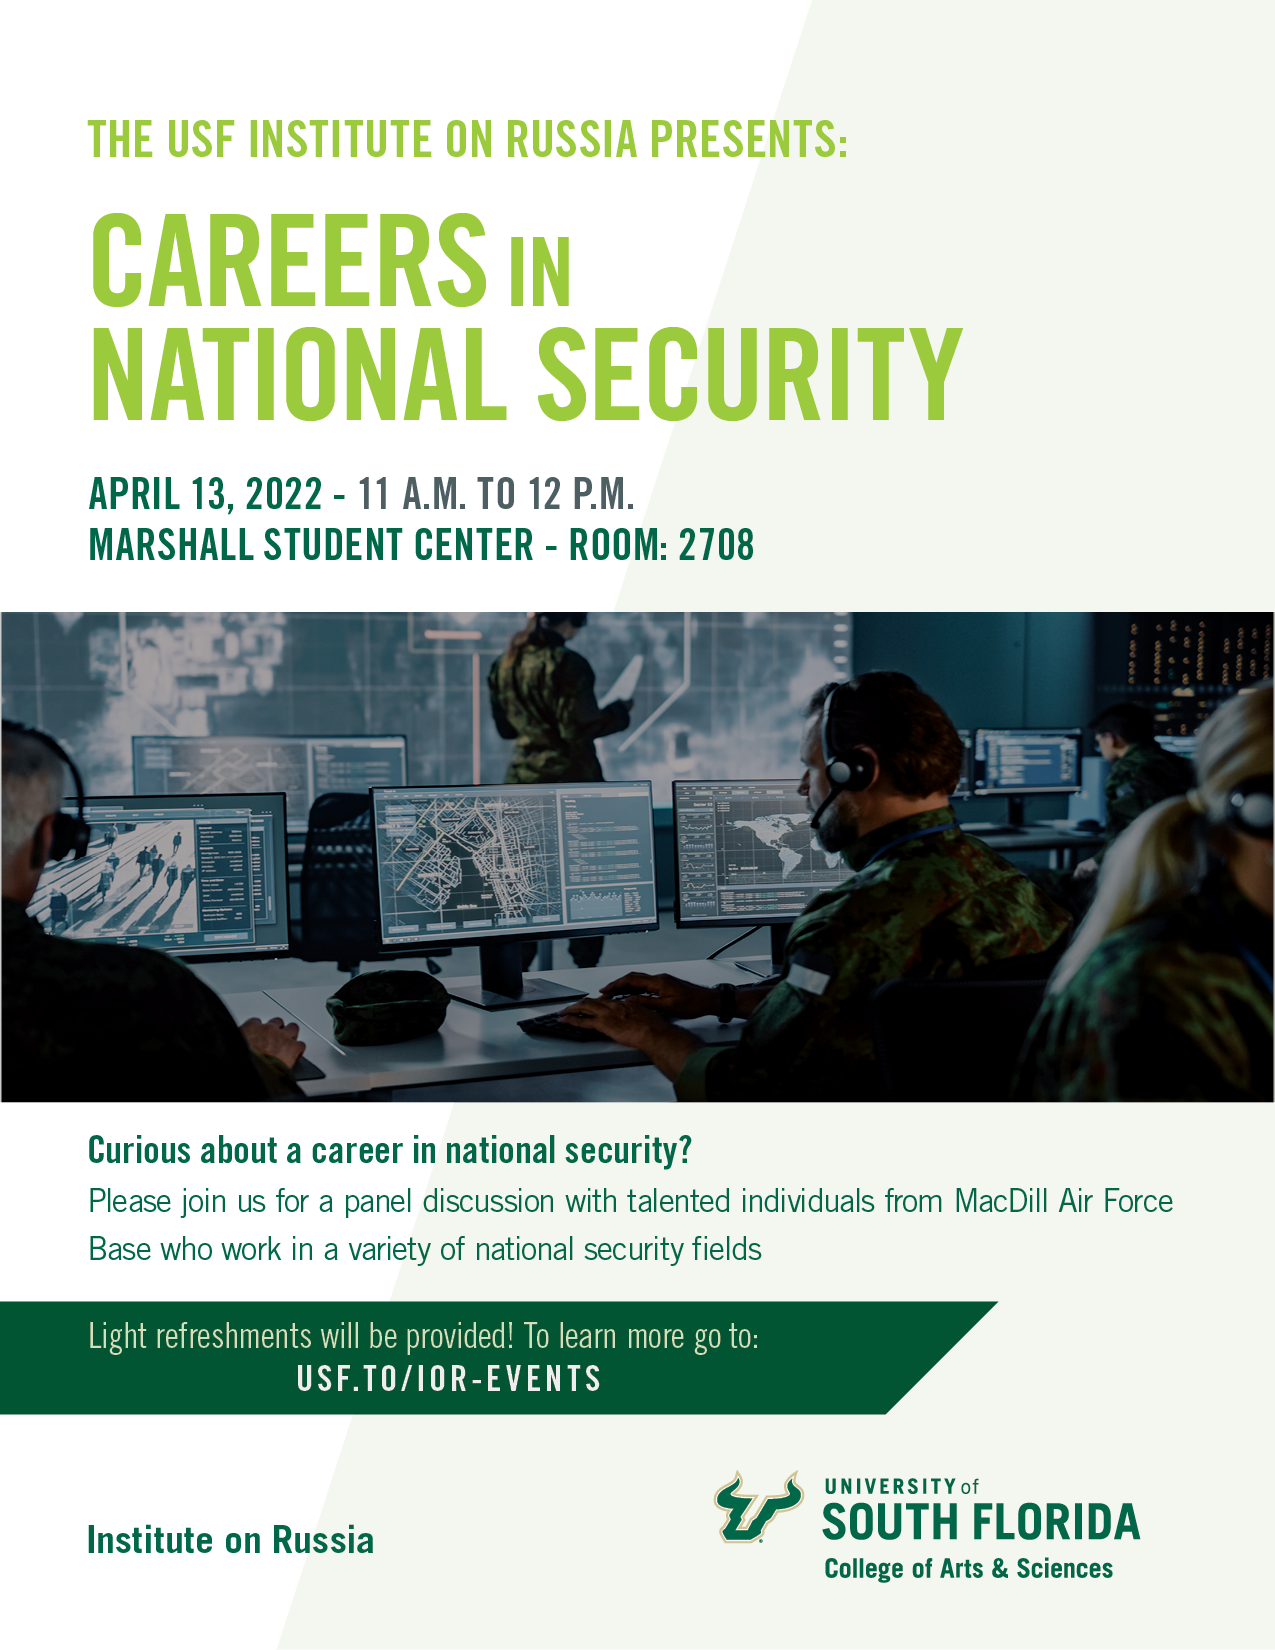 Careers in National Security flyer